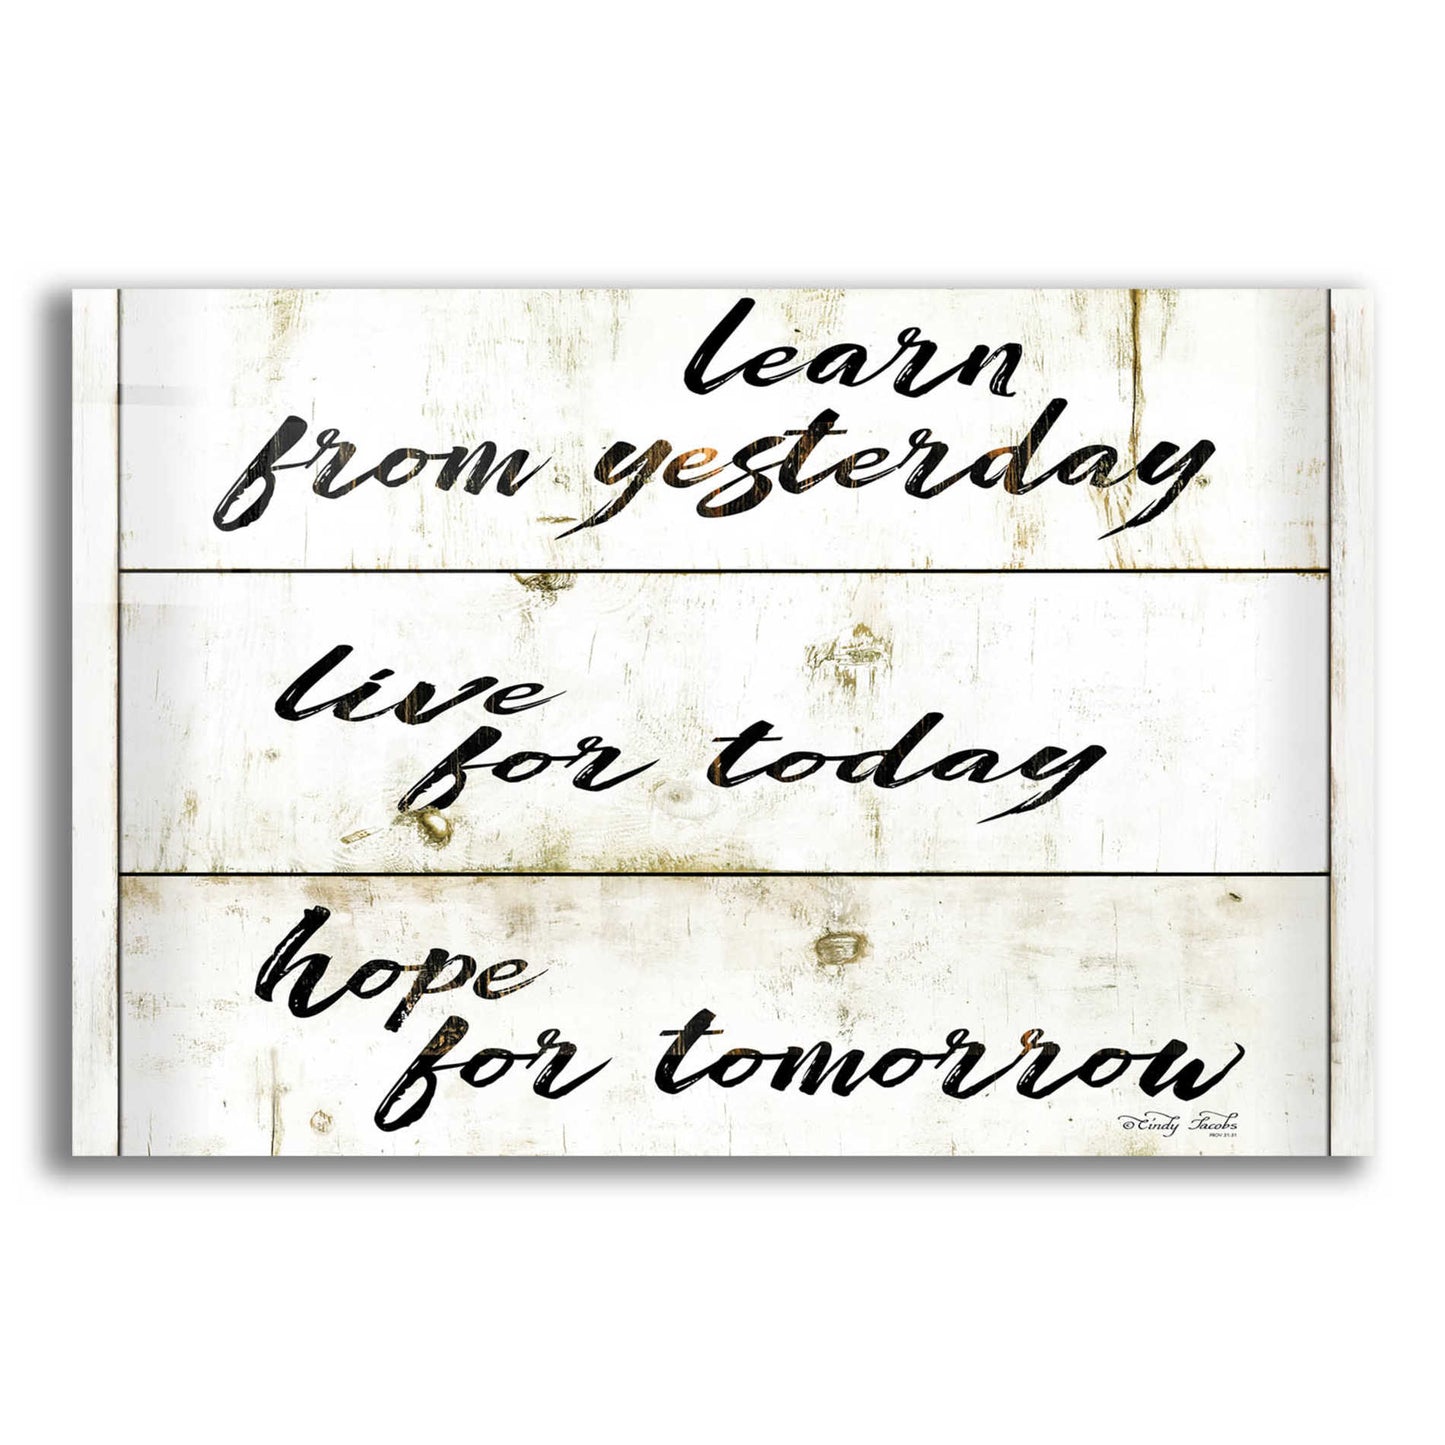 Epic Art 'Live for Today' by Cindy Jacobs, Acrylic Glass Wall Art